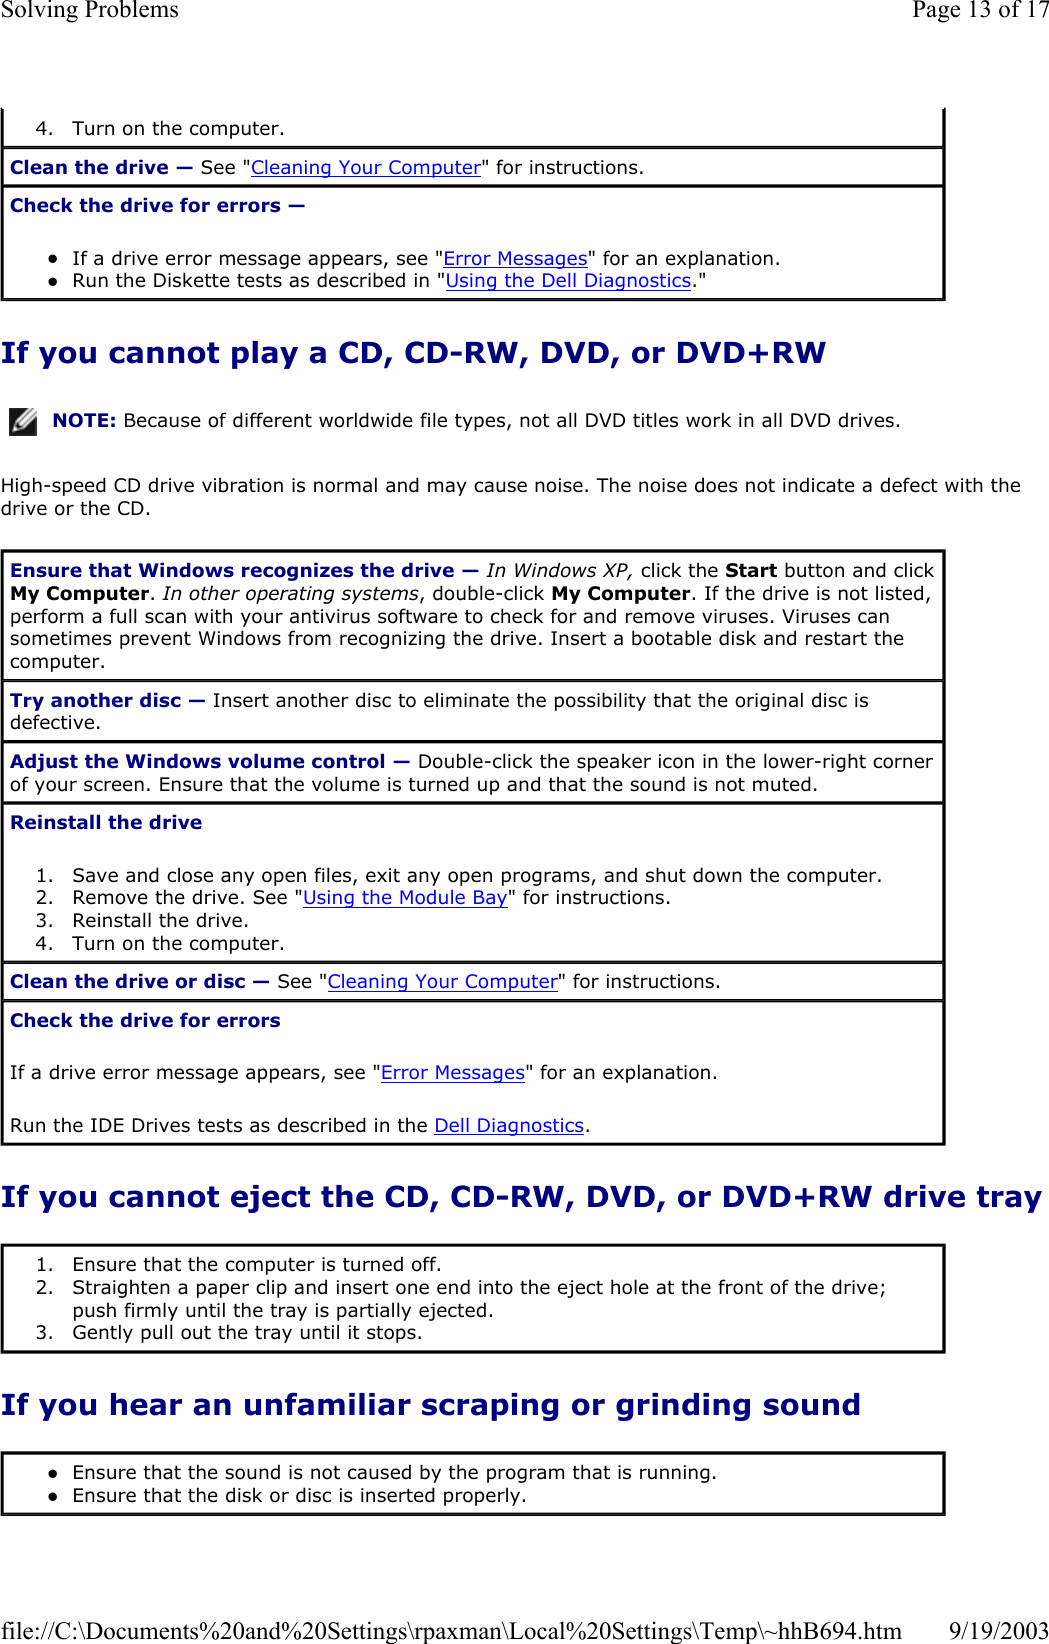 If you cannot play a CD, CD-RW, DVD, or DVD+RW High-speed CD drive vibration is normal and may cause noise. The noise does not indicate a defect with the drive or the CD. If you cannot eject the CD, CD-RW, DVD, or DVD+RW drive tray If you hear an unfamiliar scraping or grinding sound 4. Turn on the computer.  Clean the drive — See &quot;Cleaning Your Computer&quot; for instructions.  Check the drive for errors —  zIf a drive error message appears, see &quot;Error Messages&quot; for an explanation.  zRun the Diskette tests as described in &quot;Using the Dell Diagnostics.&quot;  NOTE: Because of different worldwide file types, not all DVD titles work in all DVD drives.Ensure that Windows recognizes the drive — In Windows XP, click the Start button and click My Computer. In other operating systems, double-click My Computer. If the drive is not listed, perform a full scan with your antivirus software to check for and remove viruses. Viruses can sometimes prevent Windows from recognizing the drive. Insert a bootable disk and restart the computer.  Try another disc — Insert another disc to eliminate the possibility that the original disc is defective. Adjust the Windows volume control — Double-click the speaker icon in the lower-right corner of your screen. Ensure that the volume is turned up and that the sound is not muted.  Reinstall the drive 1. Save and close any open files, exit any open programs, and shut down the computer.  2. Remove the drive. See &quot;Using the Module Bay&quot; for instructions.  3. Reinstall the drive.  4. Turn on the computer.  Clean the drive or disc — See &quot;Cleaning Your Computer&quot; for instructions.  Check the drive for errors If a drive error message appears, see &quot;Error Messages&quot; for an explanation. Run the IDE Drives tests as described in the Dell Diagnostics. 1. Ensure that the computer is turned off.  2. Straighten a paper clip and insert one end into the eject hole at the front of the drive; push firmly until the tray is partially ejected.  3. Gently pull out the tray until it stops.  zEnsure that the sound is not caused by the program that is running.  zEnsure that the disk or disc is inserted properly.  Page 13 of 17Solving Problems9/19/2003file://C:\Documents%20and%20Settings\rpaxman\Local%20Settings\Temp\~hhB694.htm